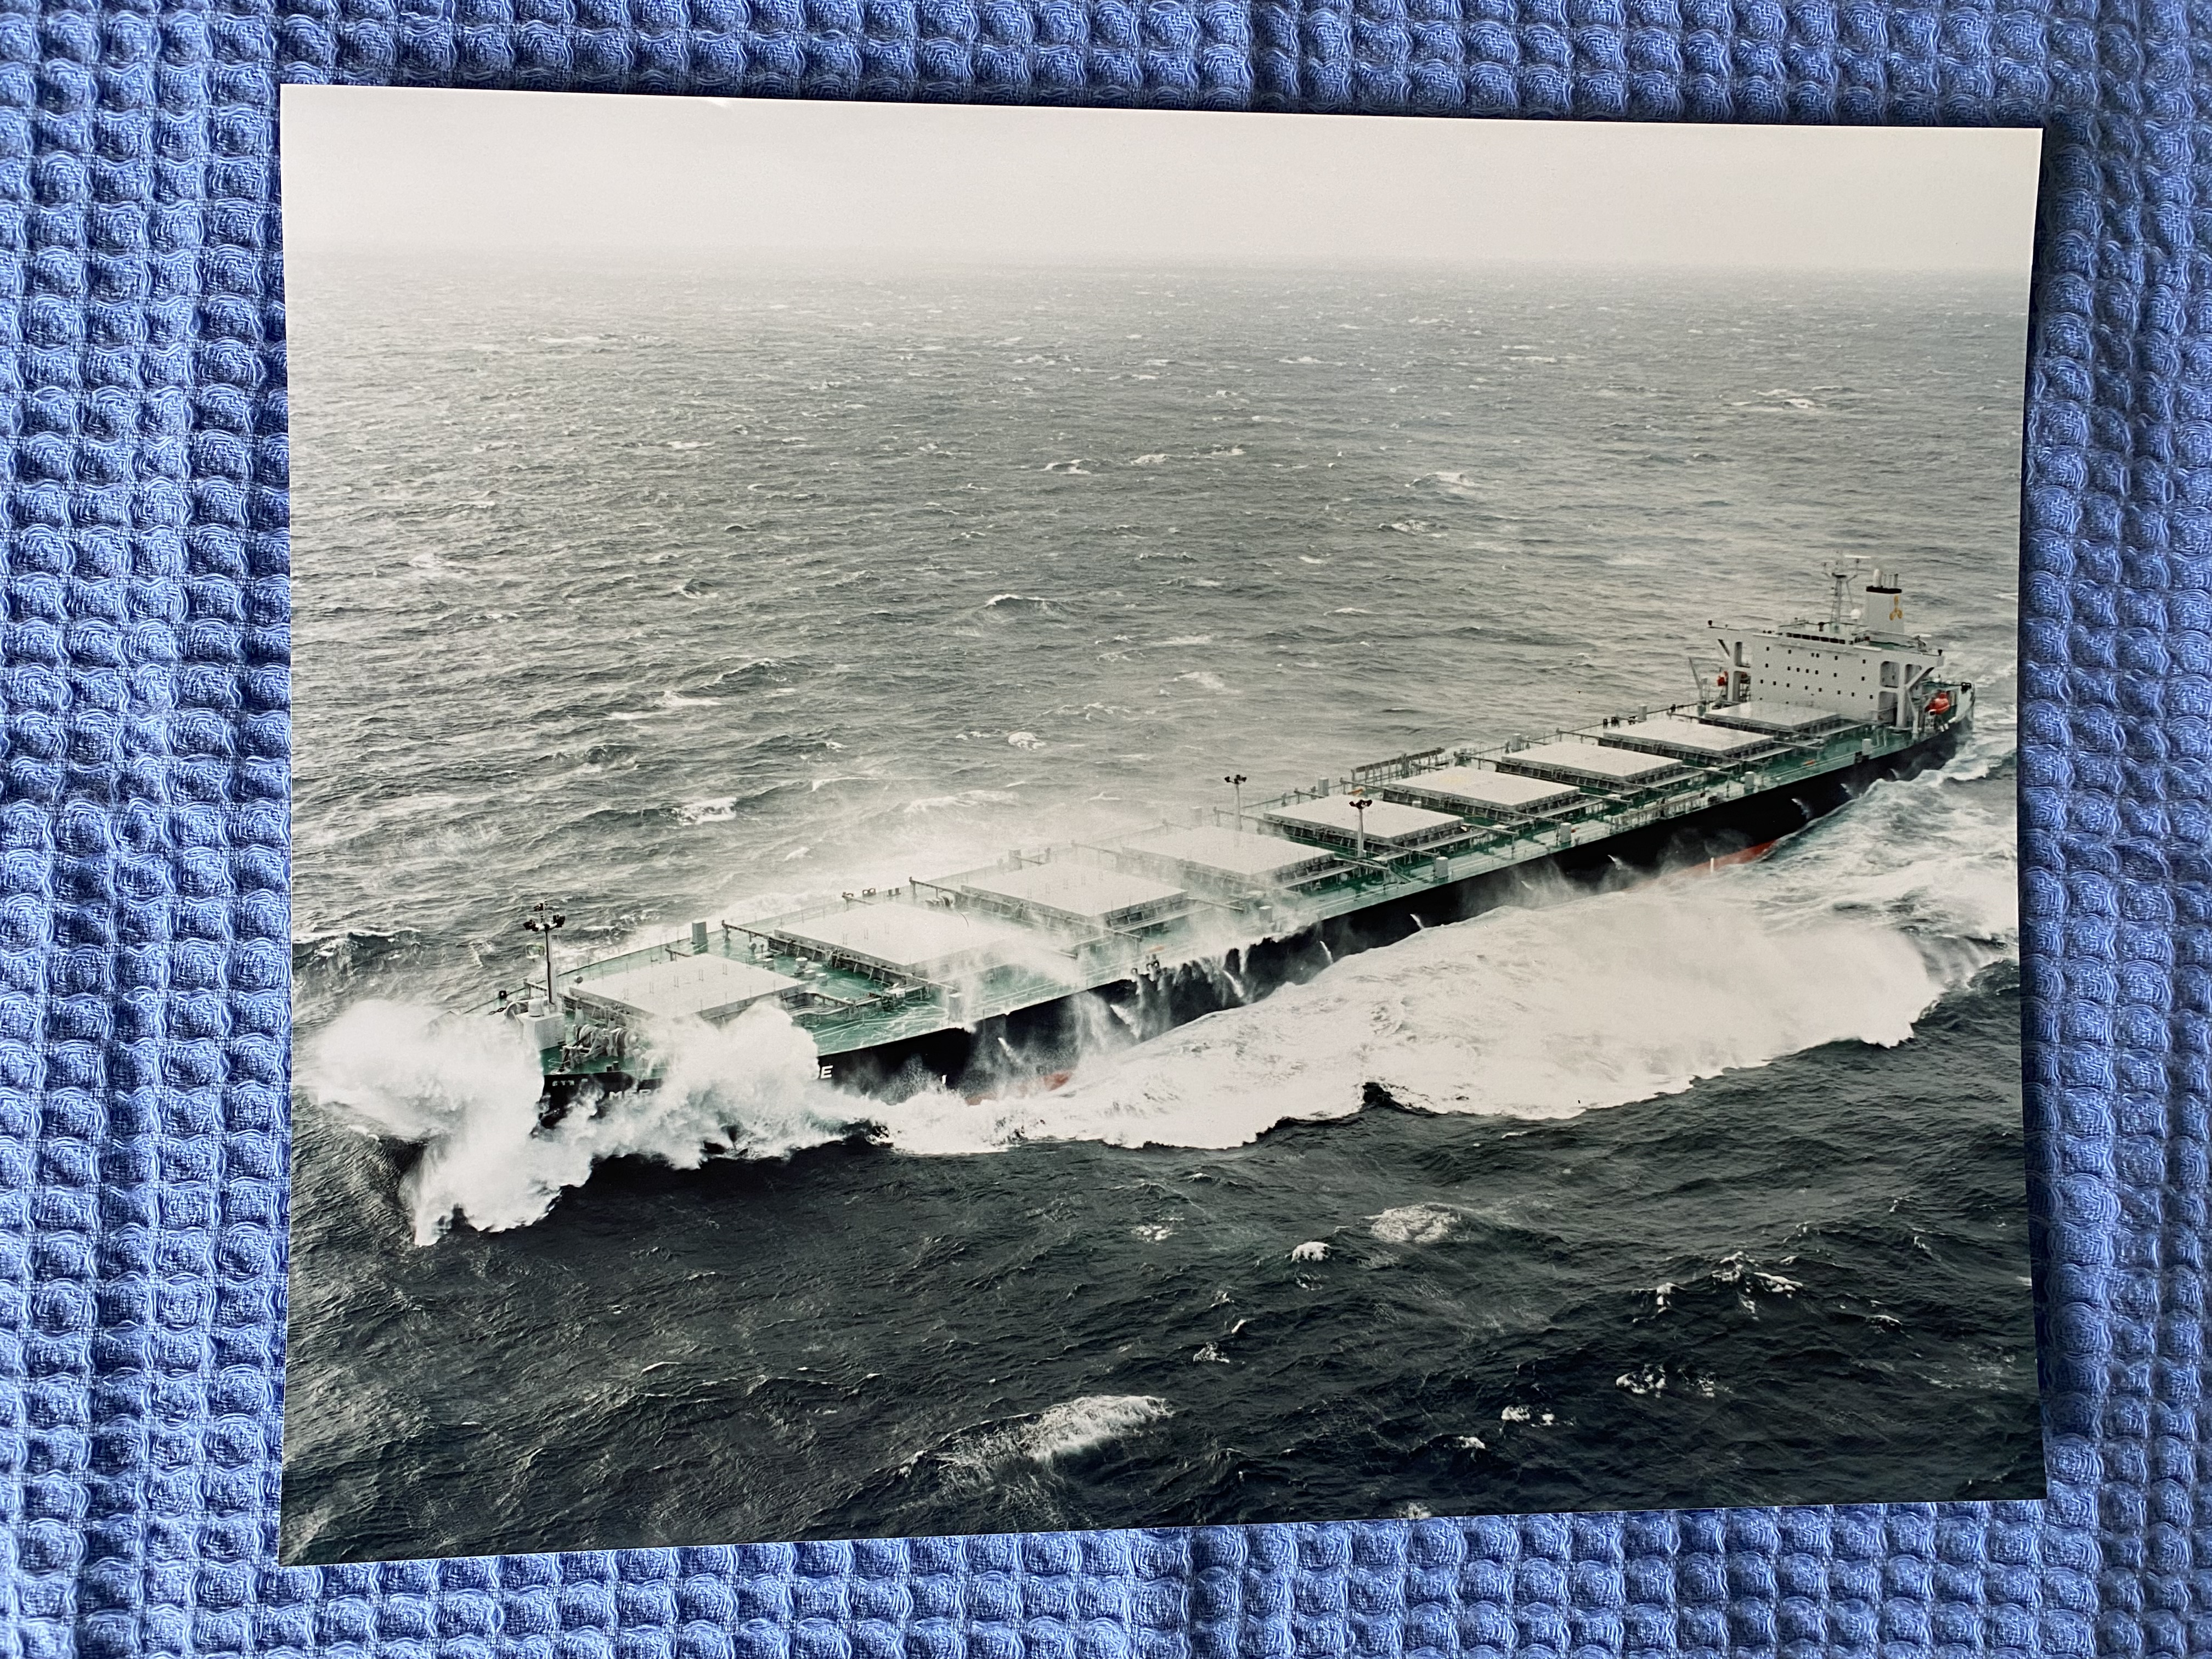 LARGE SIZE COLOUR PHOTOGRAPH OF A CONTAINER VESSEL IN ROUGH SEAS